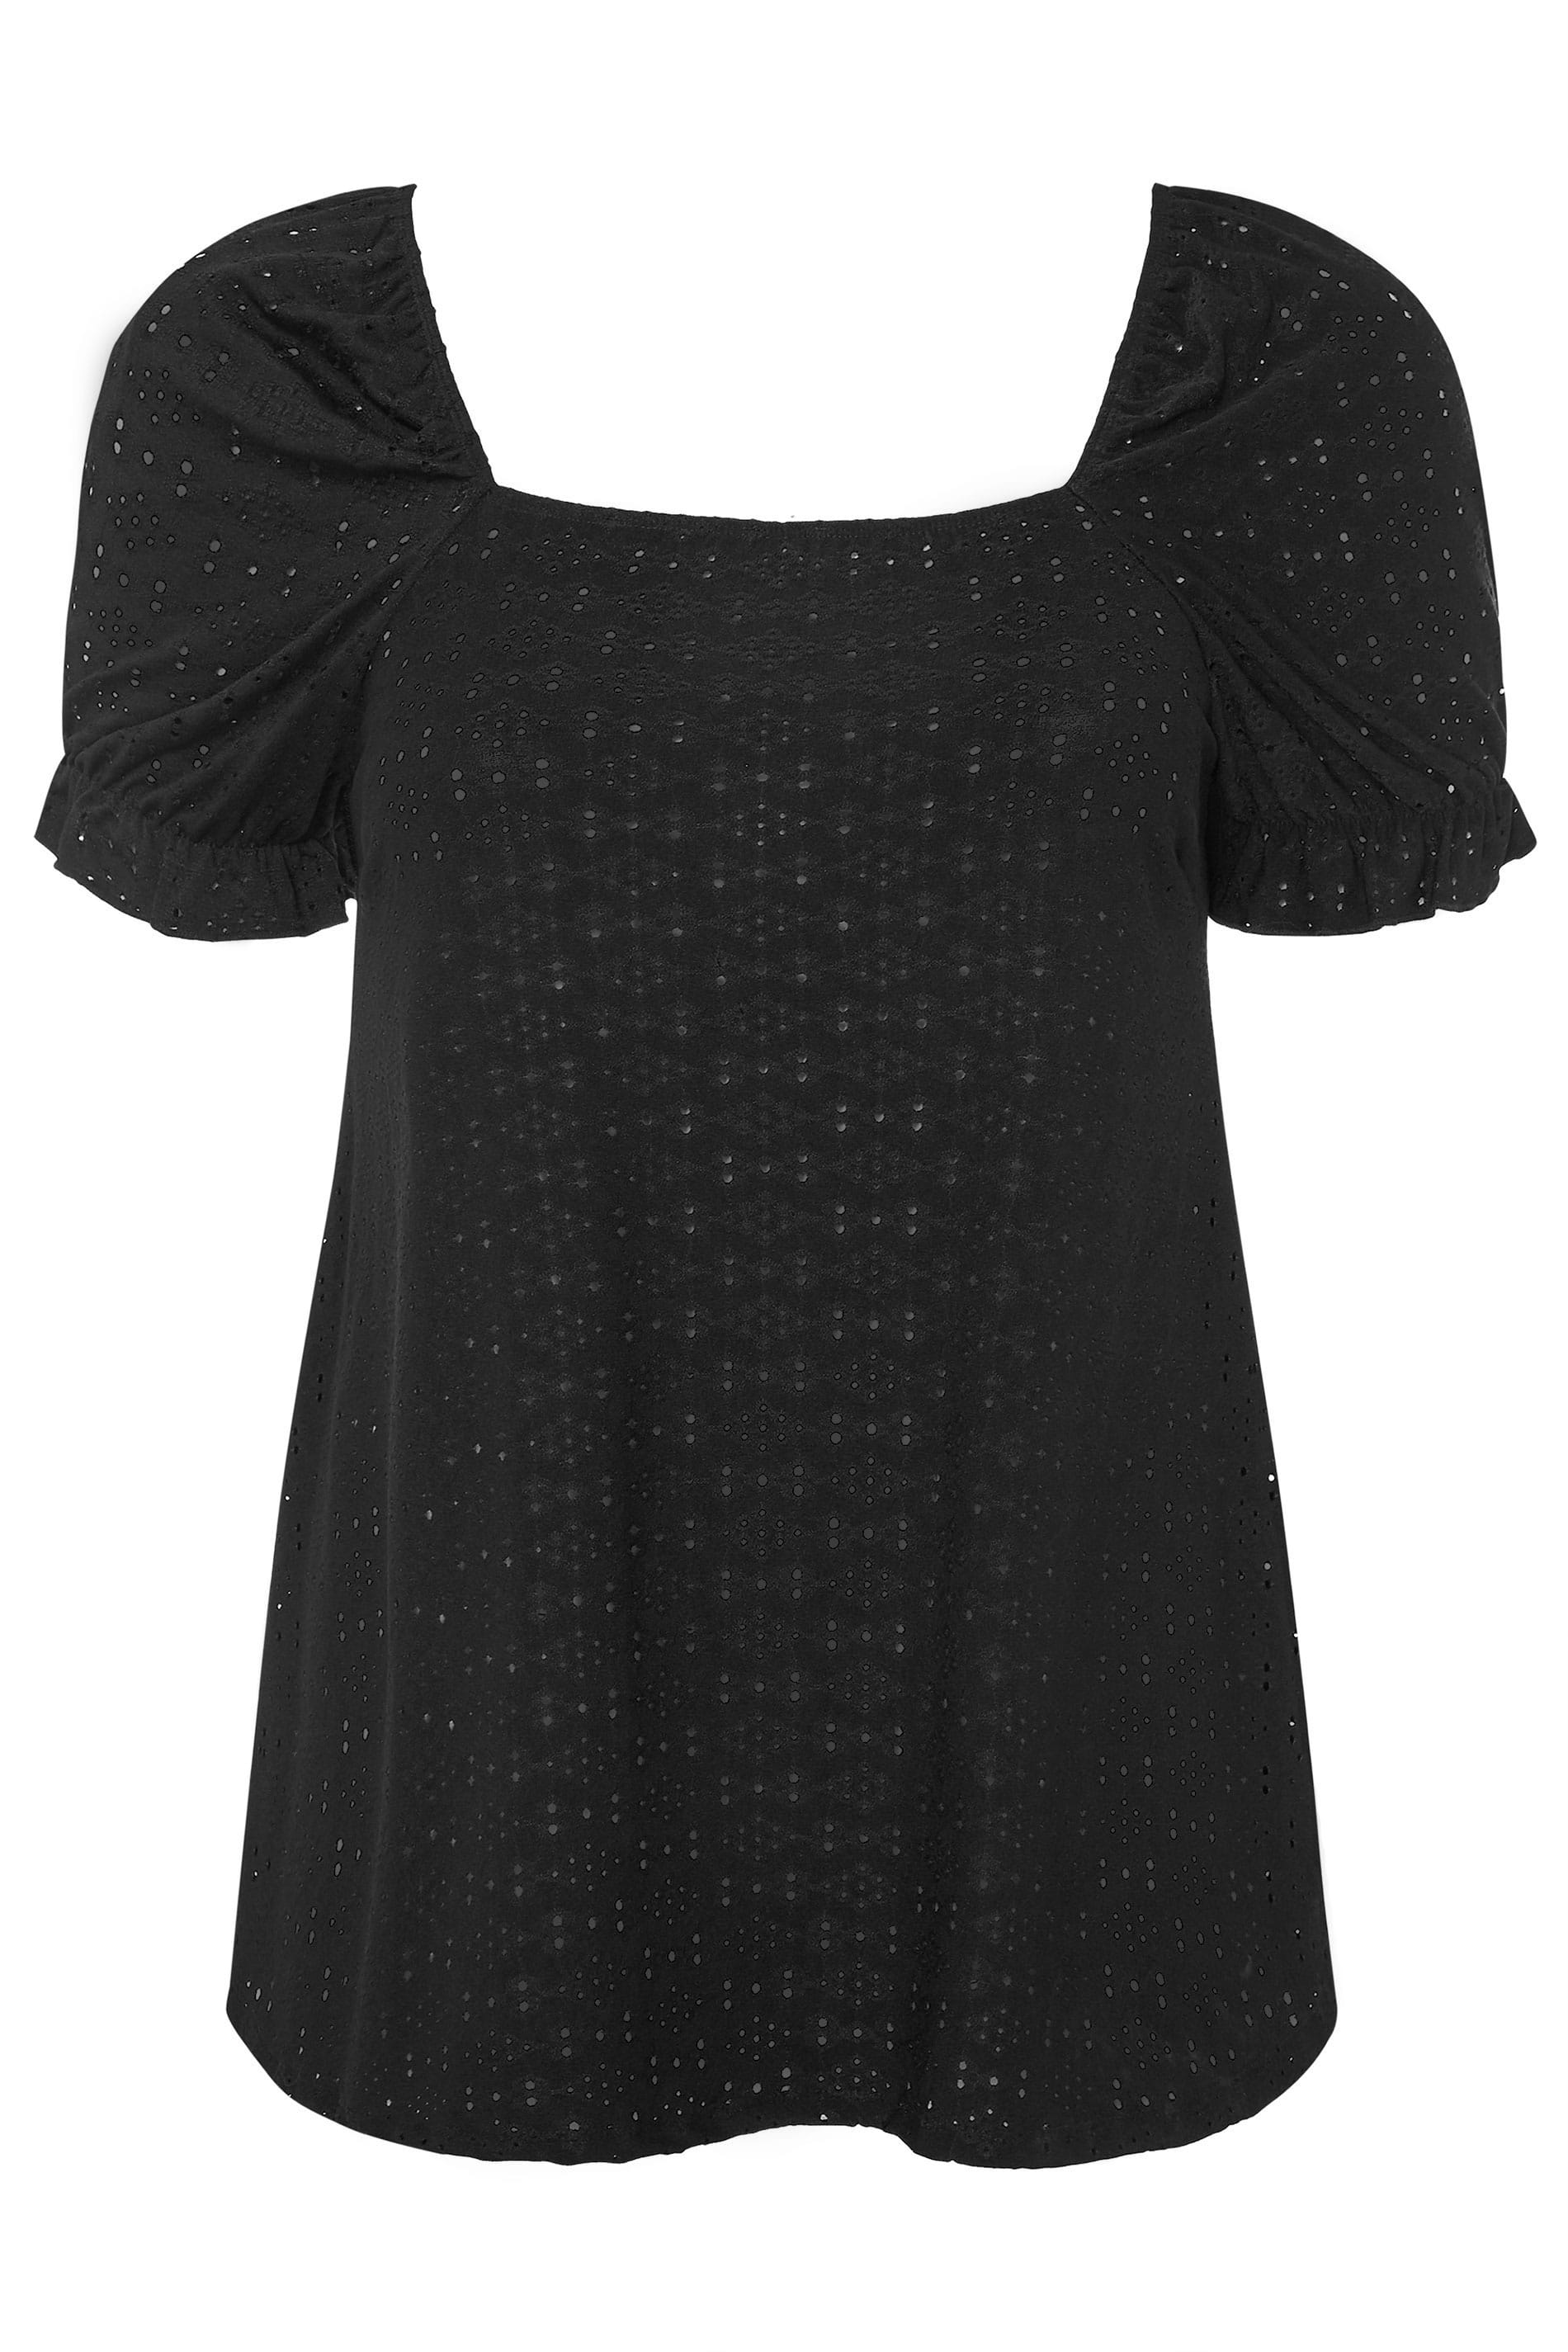 LIMITED COLLECTION Black Broderie Anglaise Milkmaid Top | Yours Clothing